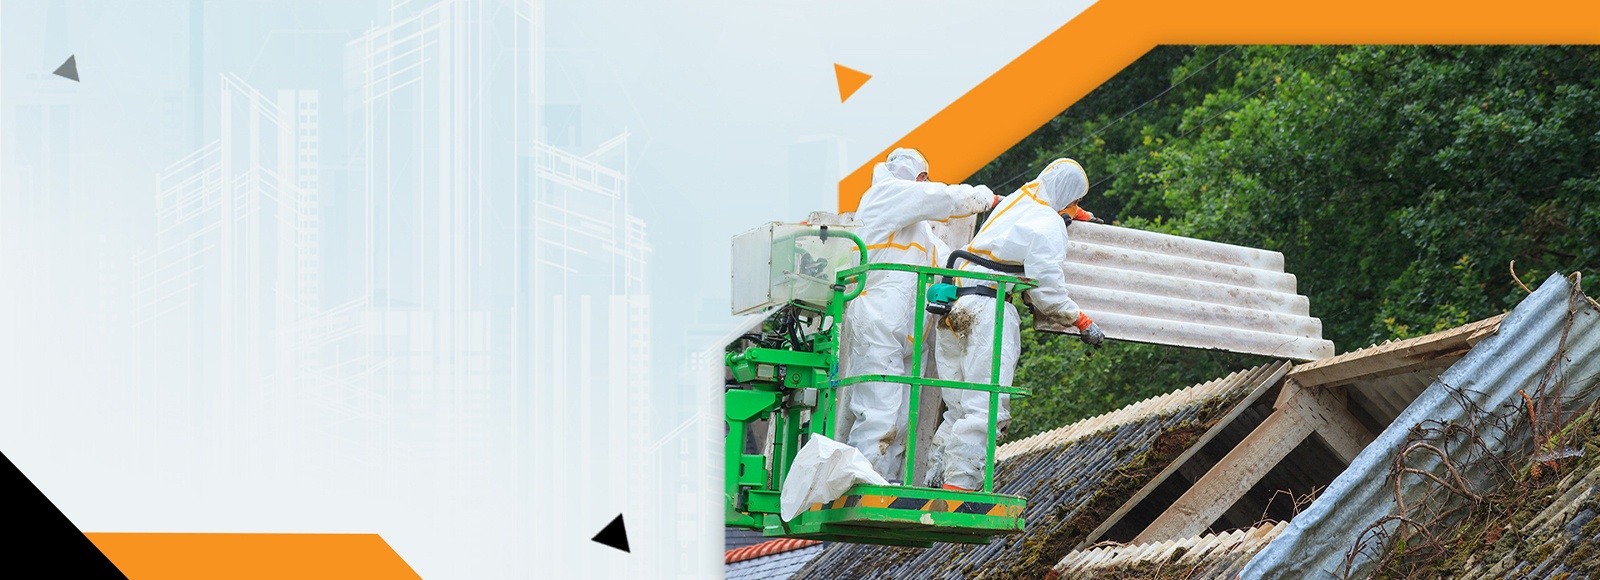 We provide high-quality Asbestos abatement and remediation services in Ottawa at fair and market-competitive pricing